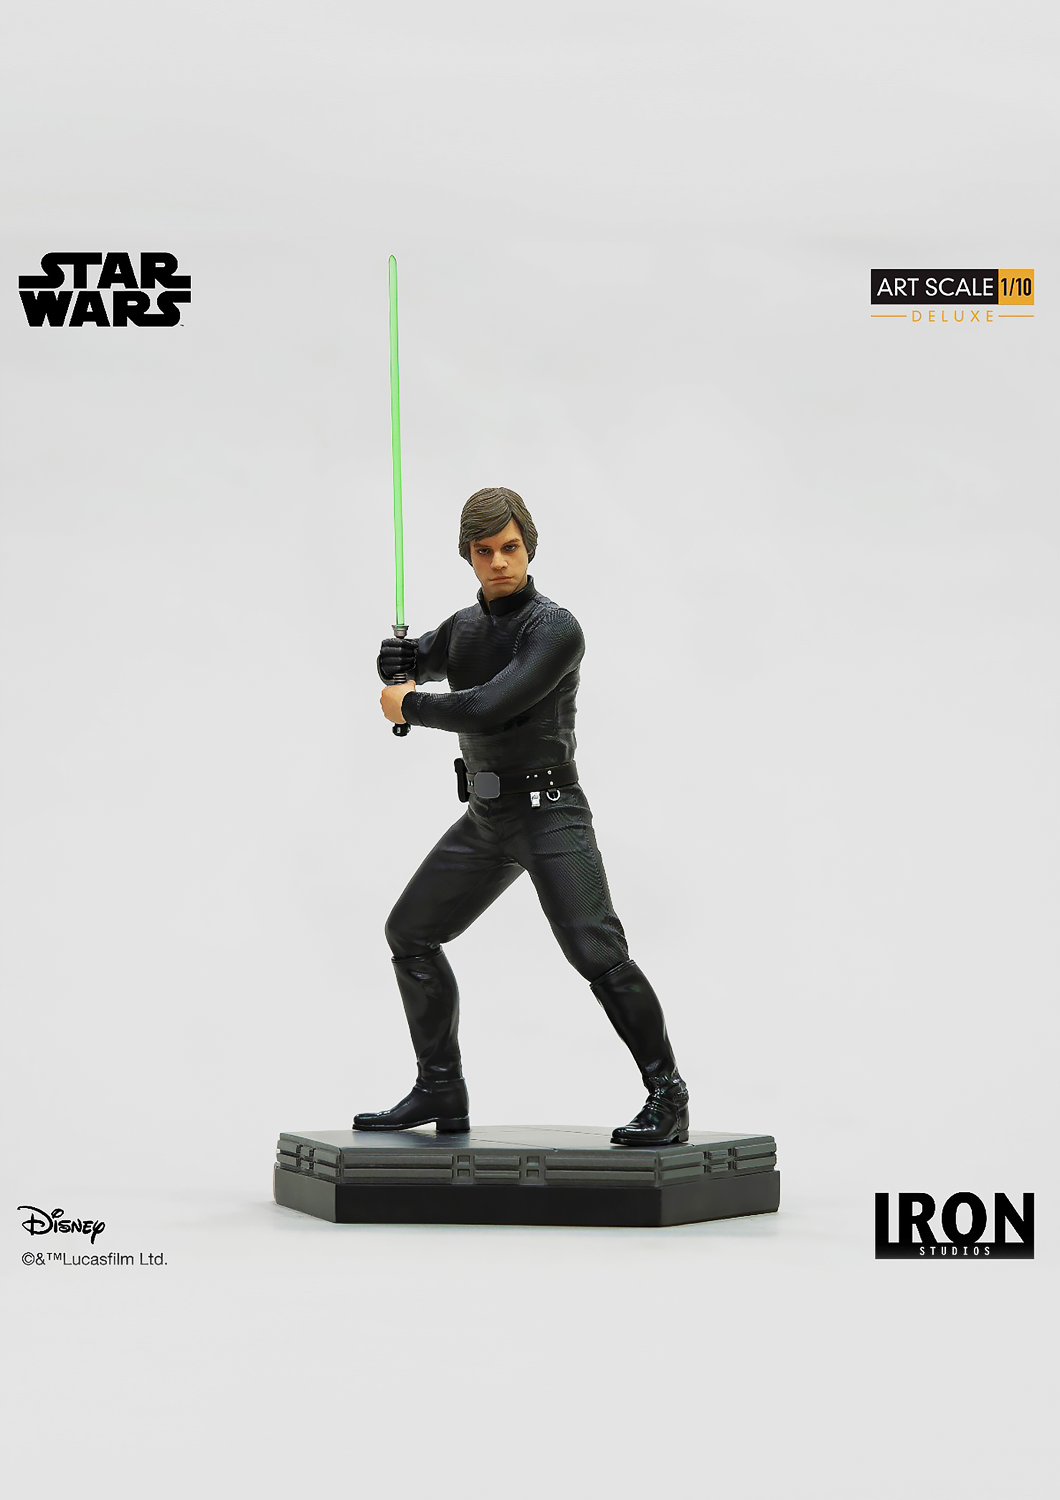 IRON STUDIOS STAR WARS LUKE SKYWALKER DELUXE ART SCALE 1/10 UCSWR21019-10 - Anotoys Collectibles